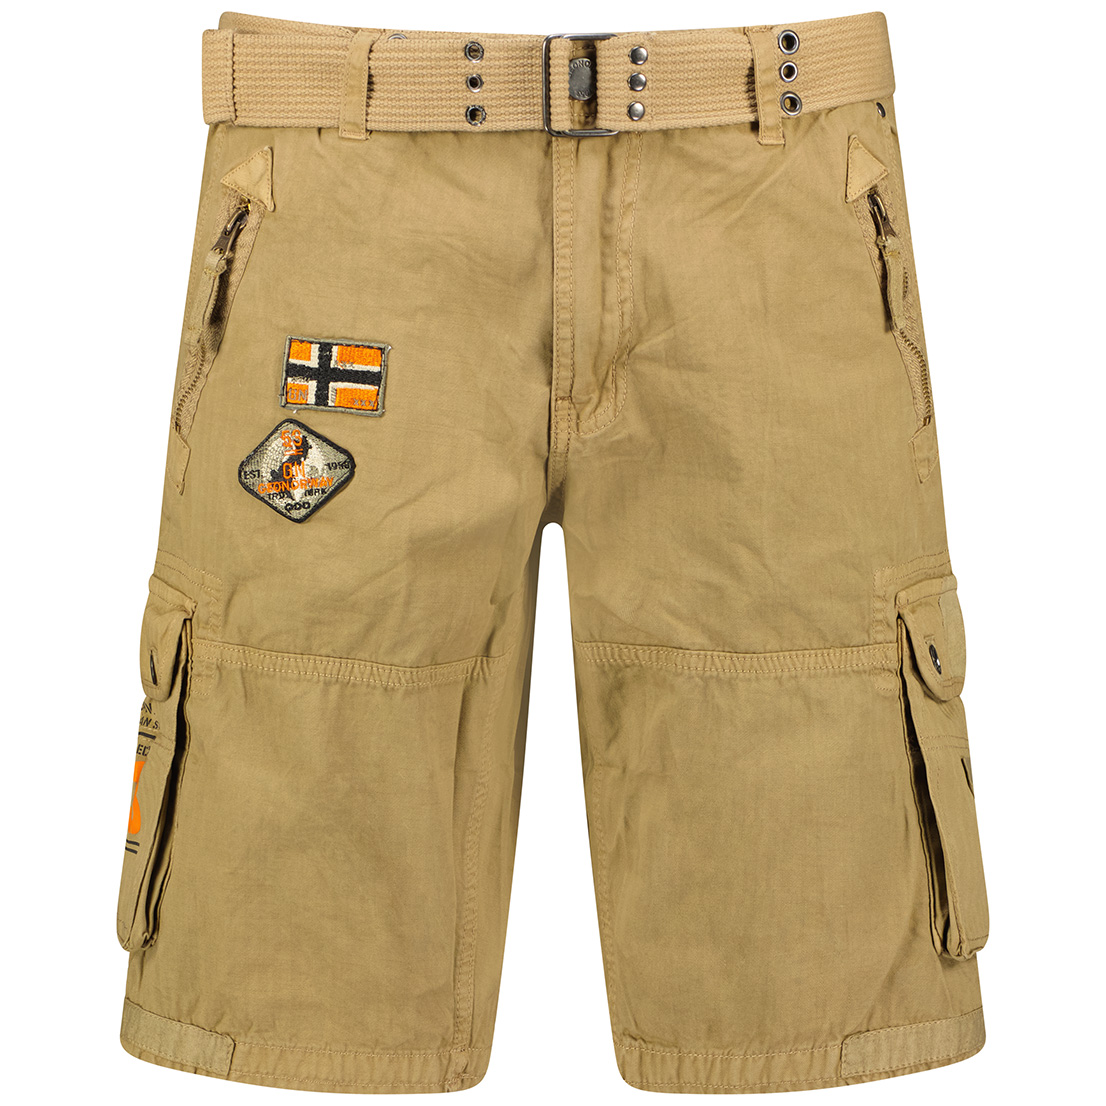 Cotton Shorts with Half Zip and Multiple Pockets